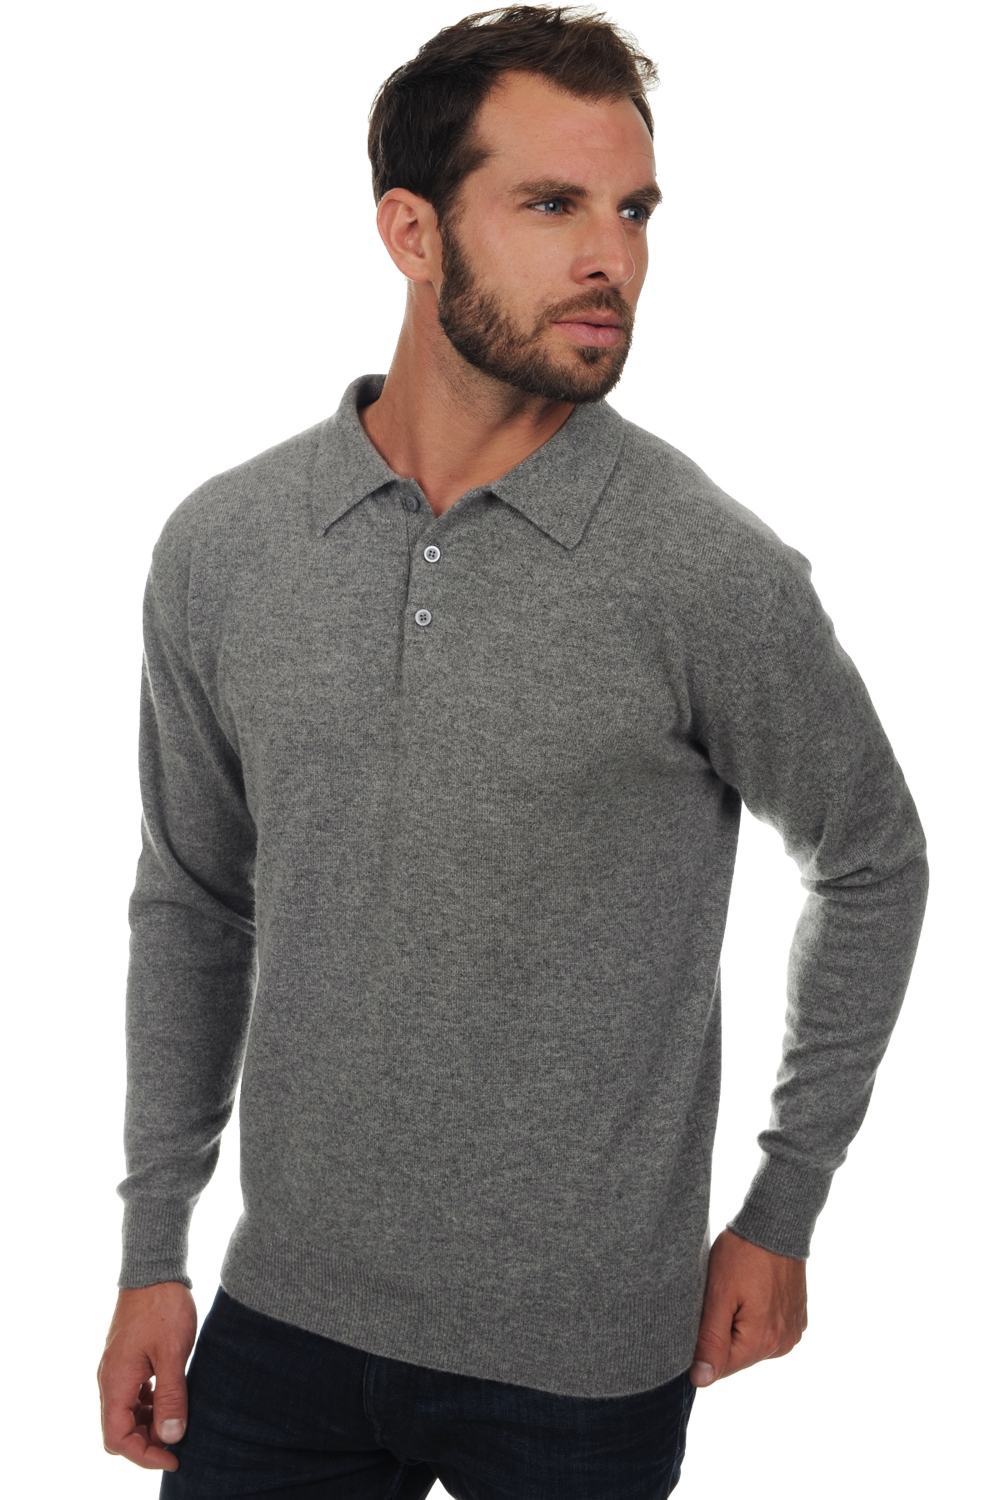 Cashmere men polo style sweaters alexandre grey marl l